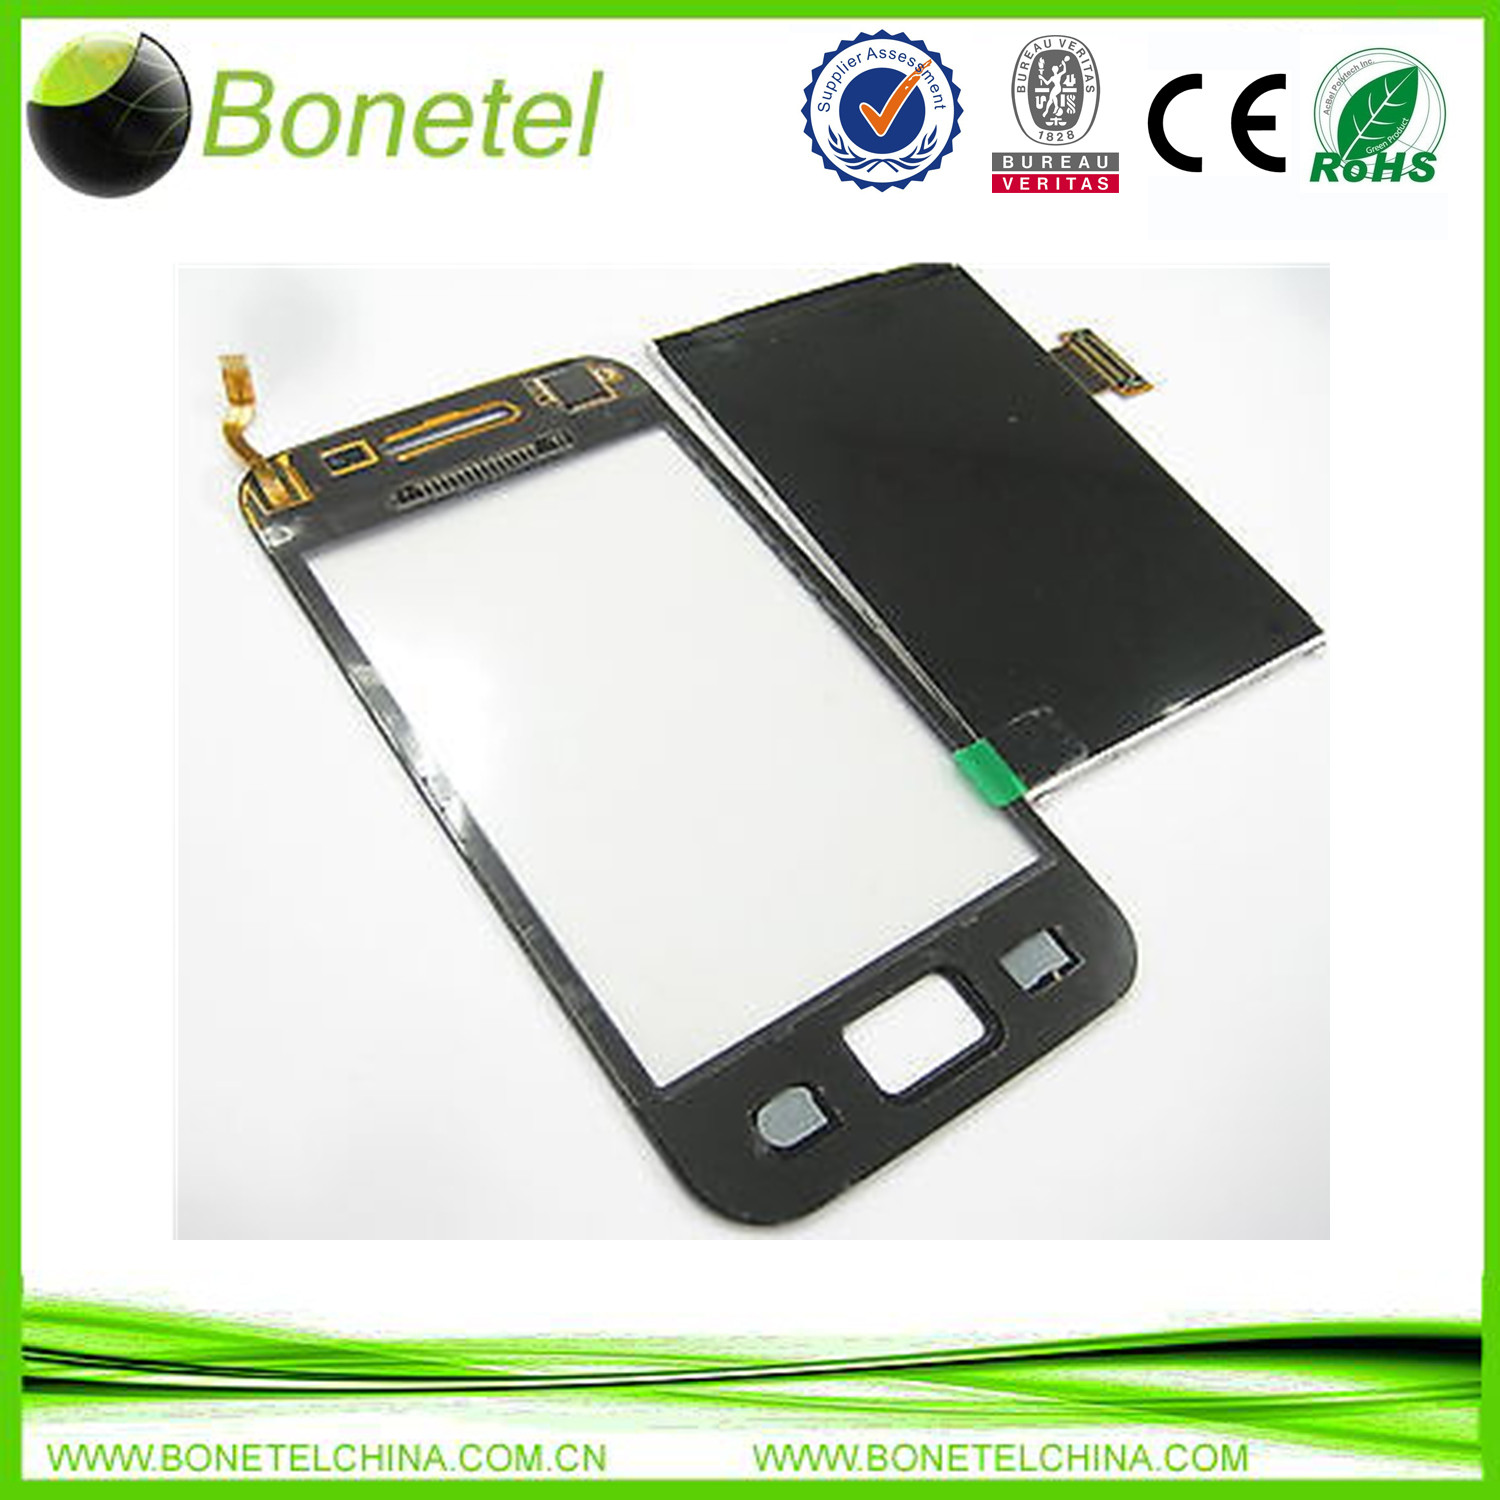 LCD Display+Touch Screen Digitizer For Samsung Galaxy Ace GT-S5830i